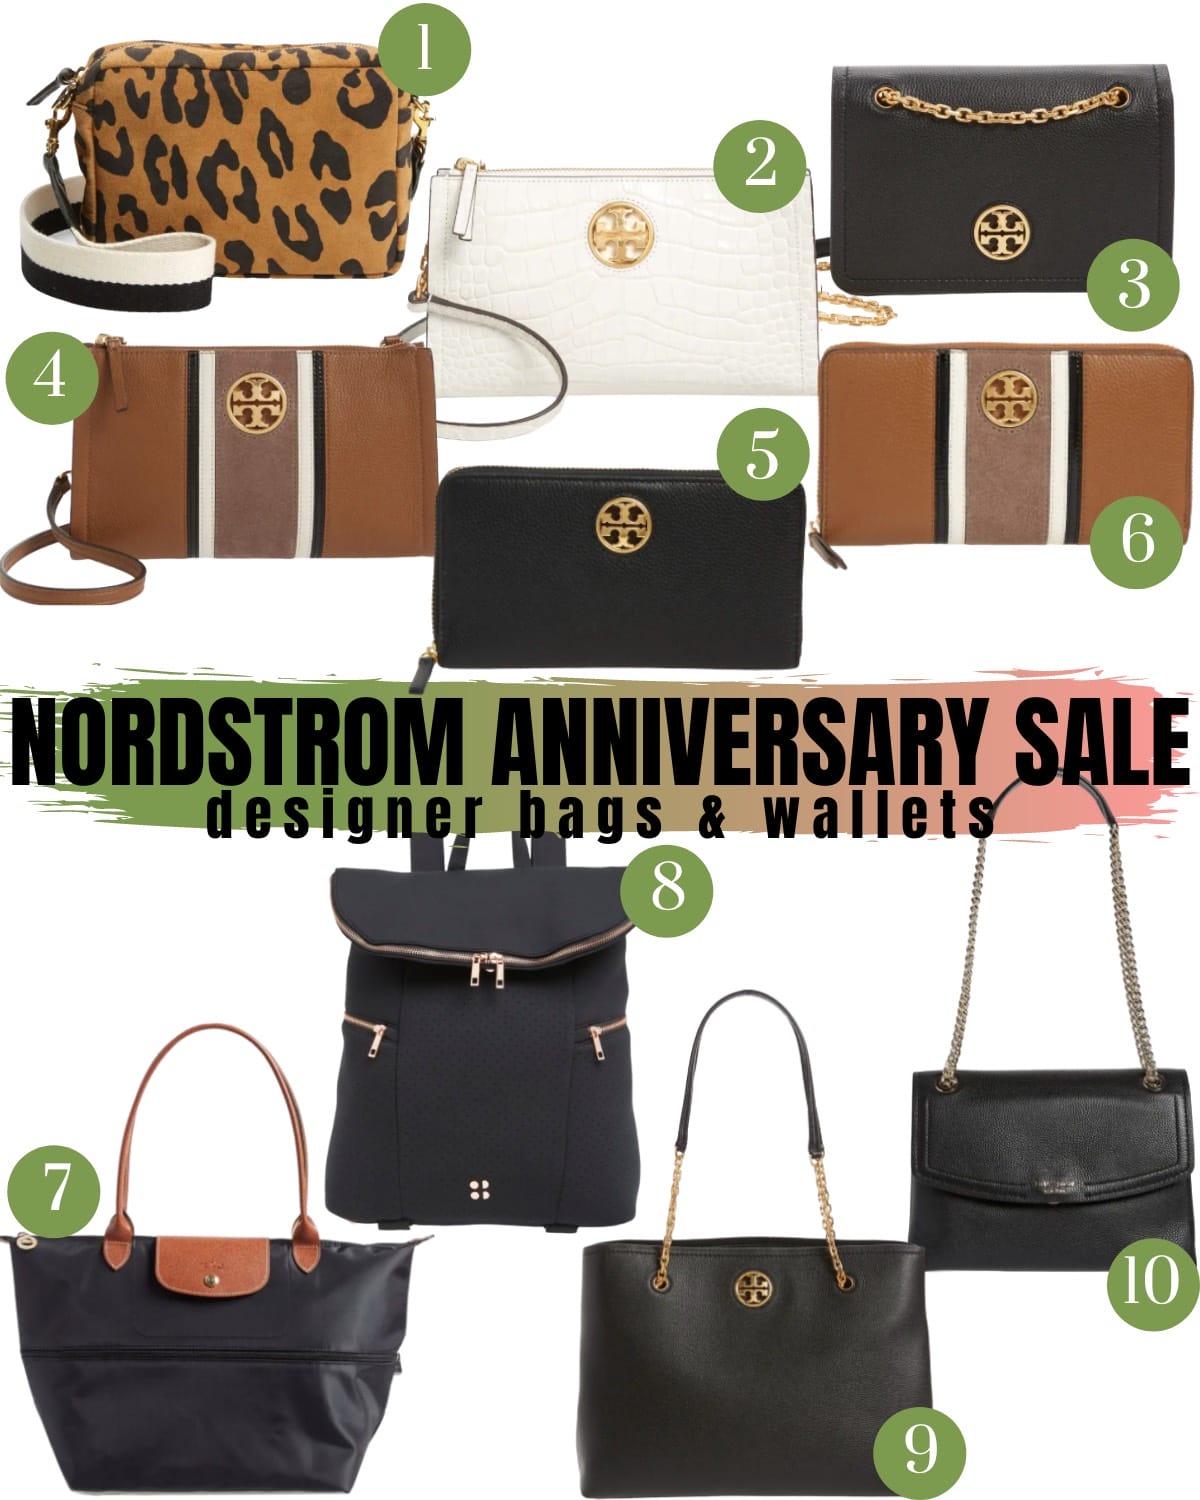 Nordstrom Anniversary Sale 2020 Bags and Wallets